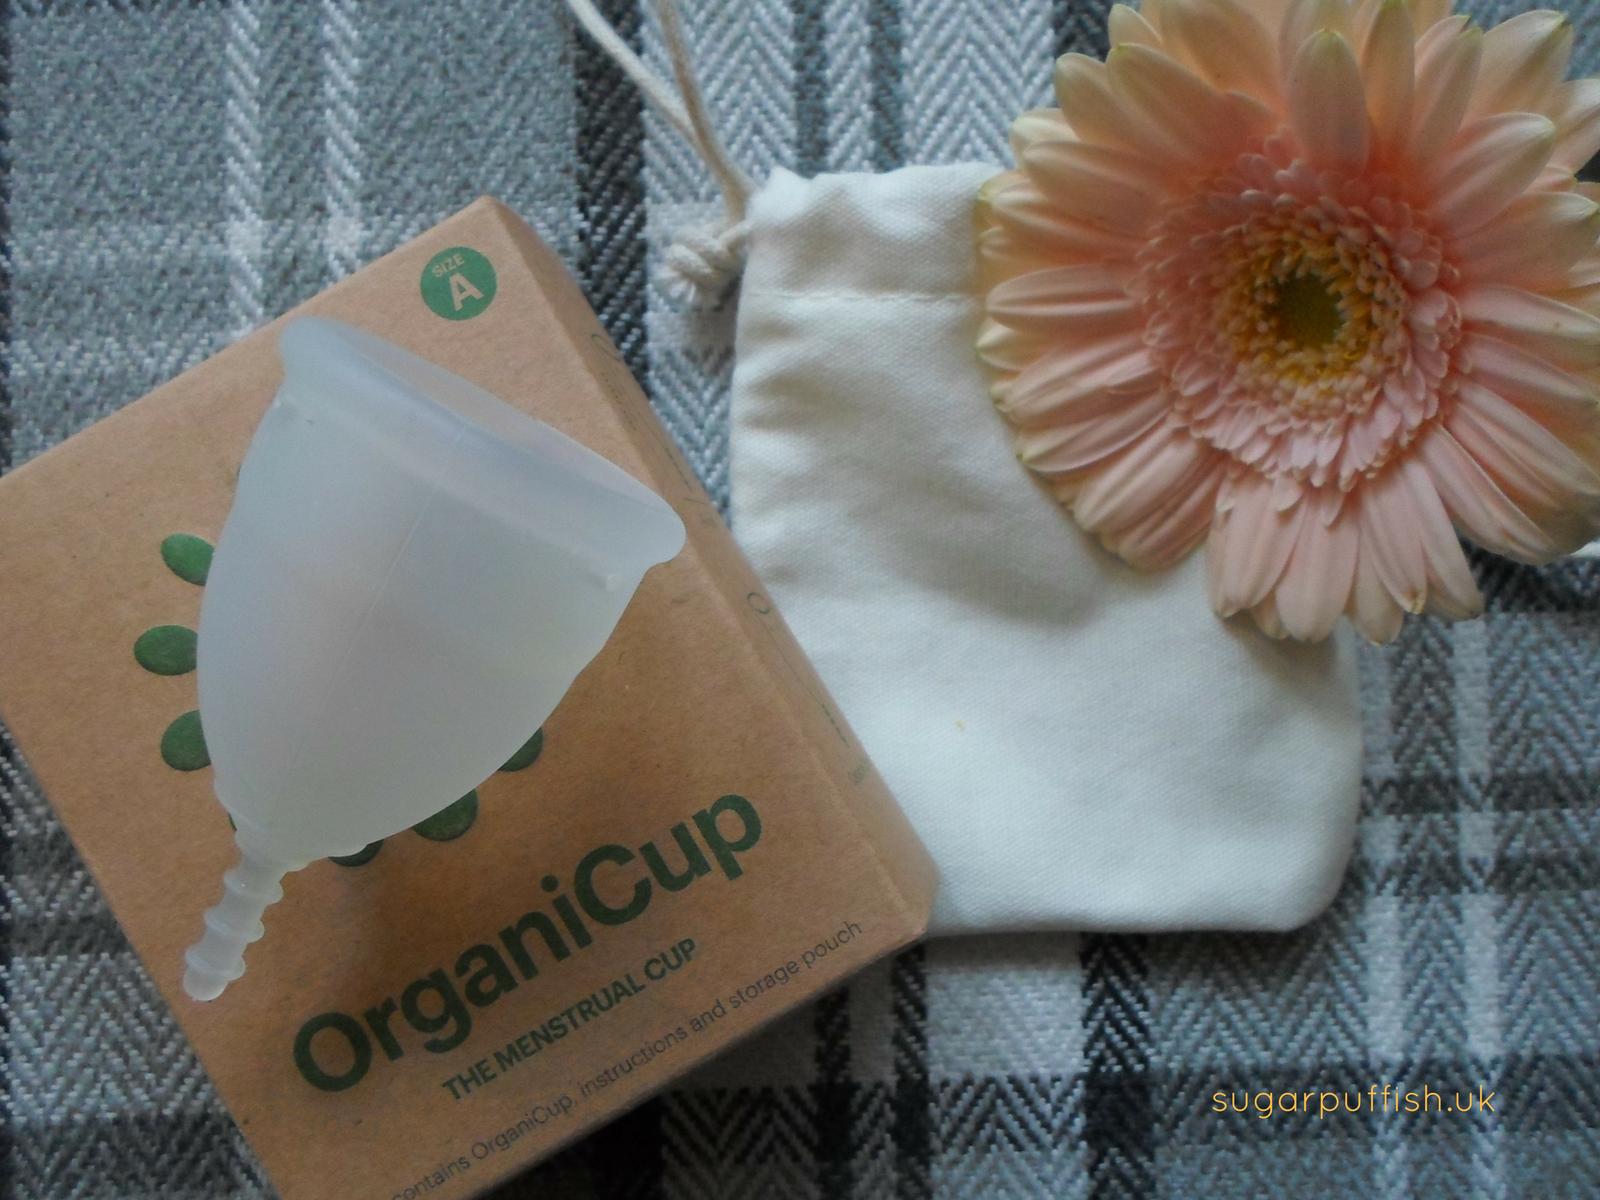 OrganiCup the menstrual cup